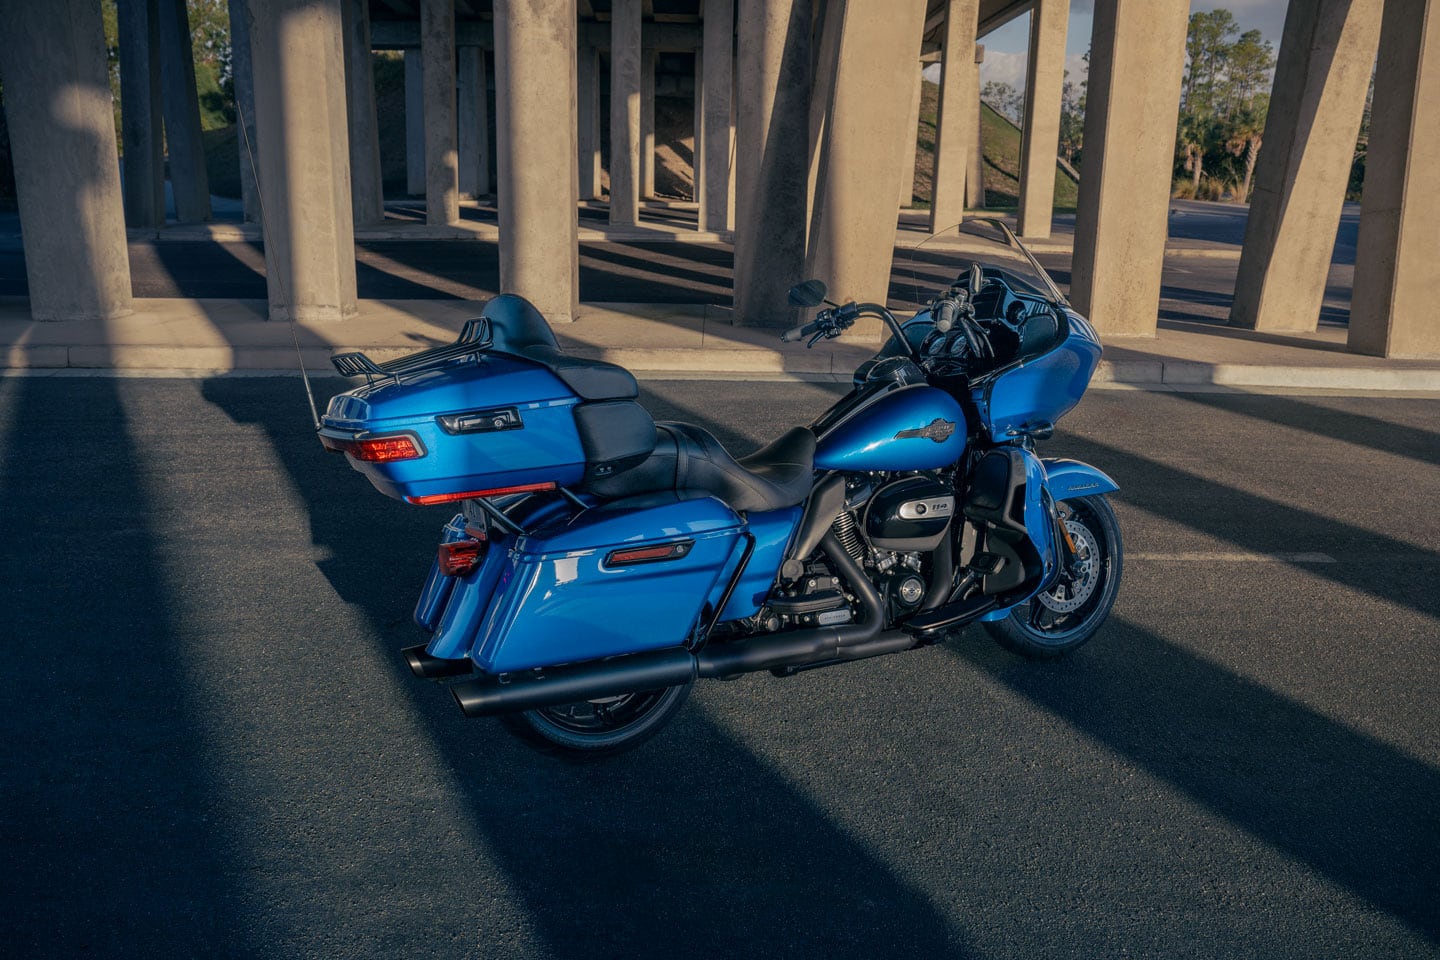 Generous upper and lower body weather protection for the rider and a plush passenger seat make the Goad Glide Limited about as comfortable as you can get on two wheels.